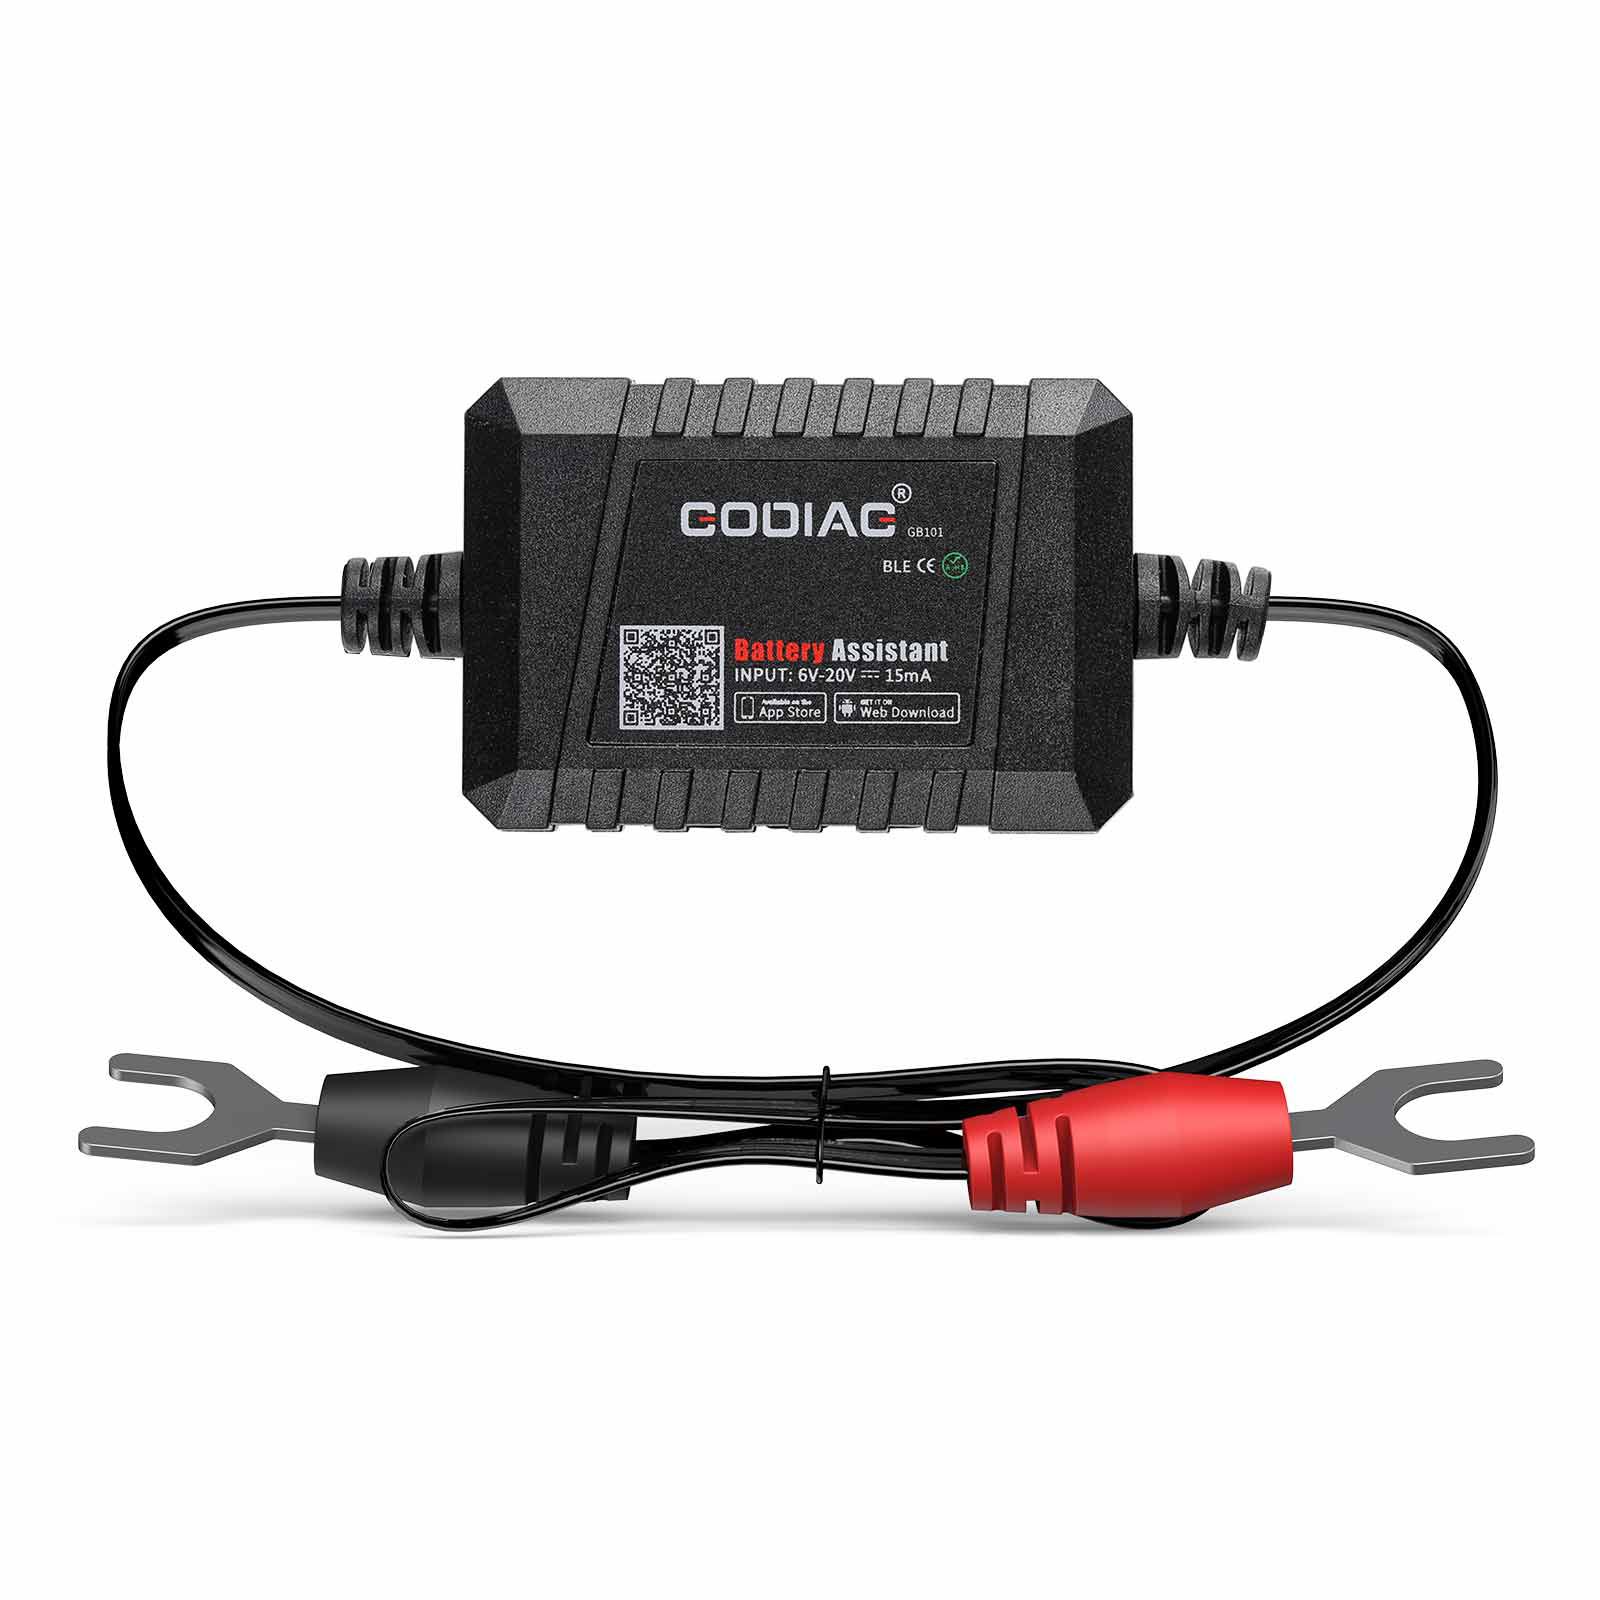 GODIAG GB101 Battery Assistant BlueTooth 4.0 Wireless 6-20V Automotive Battery Load Tester Diagnositic Analyzer Monitor for Android & iOS